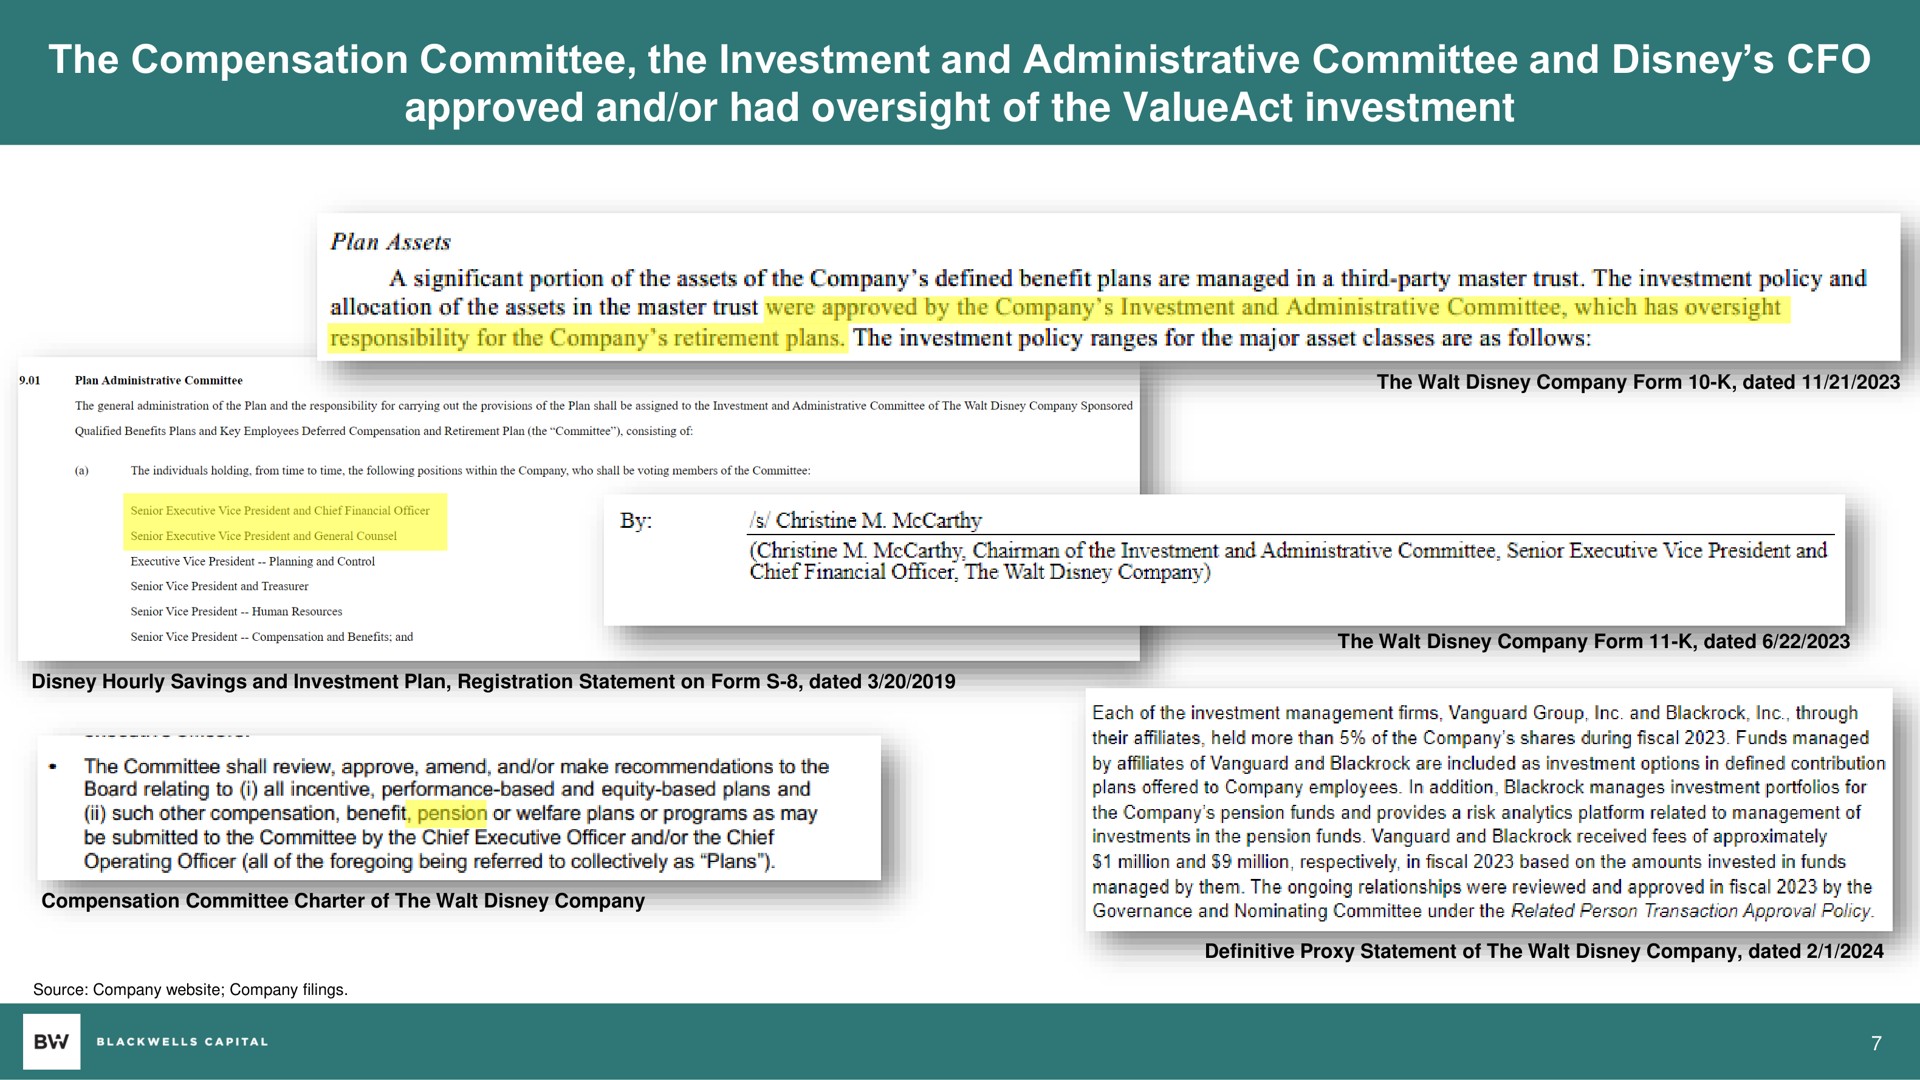 the compensation committee the investment and administrative committee and approved and or had oversight of the investment | Blackwells Capital